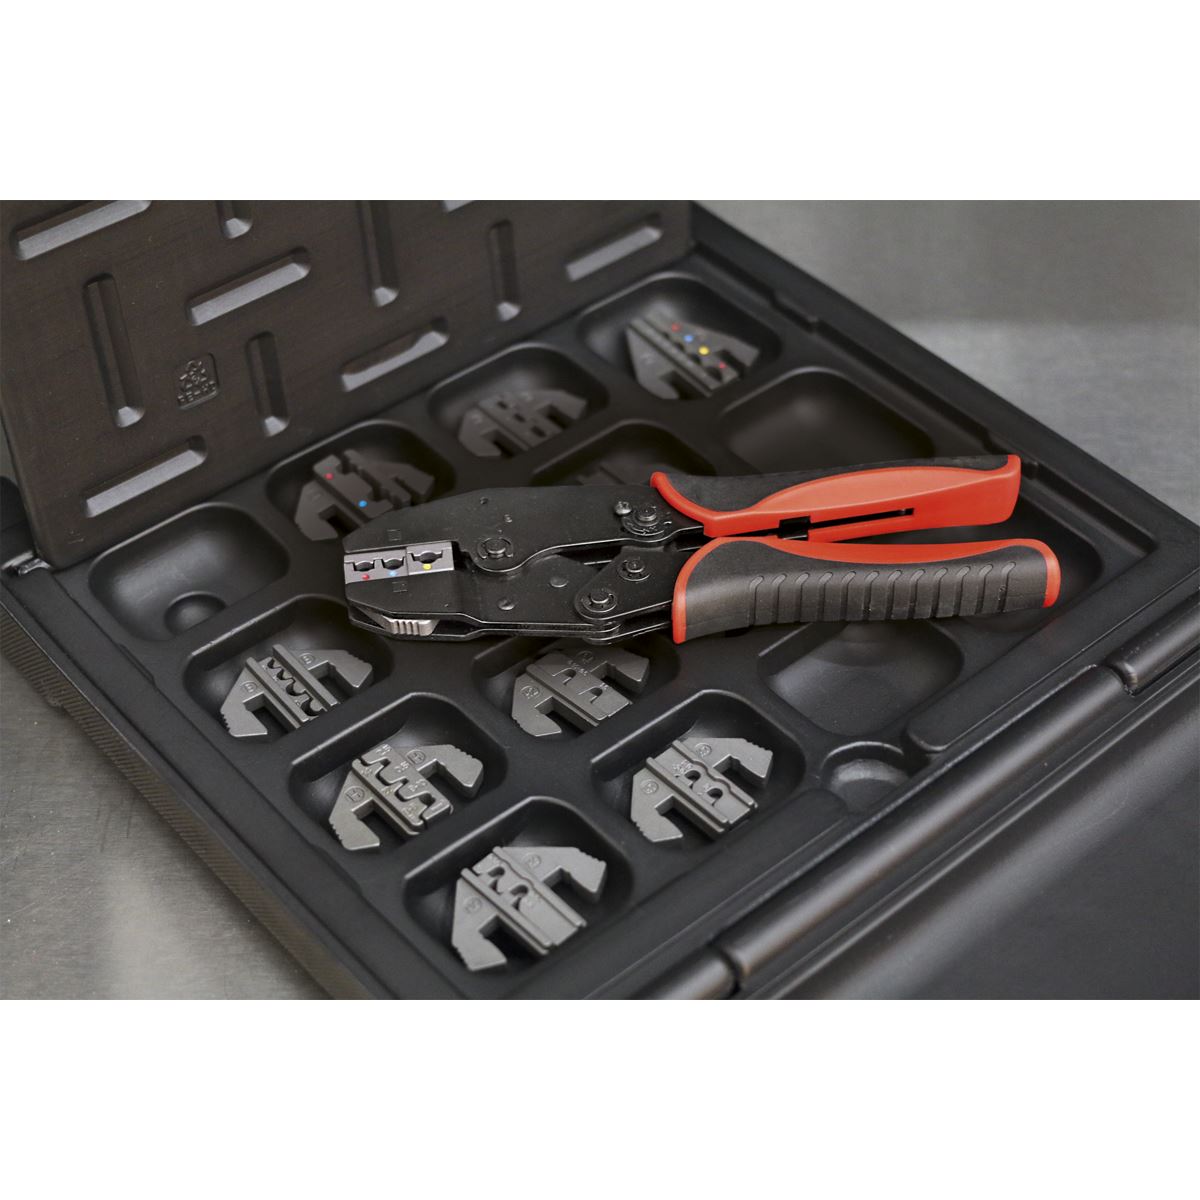 Sealey Ratchet Crimping Tool with Jaws and Storage Case